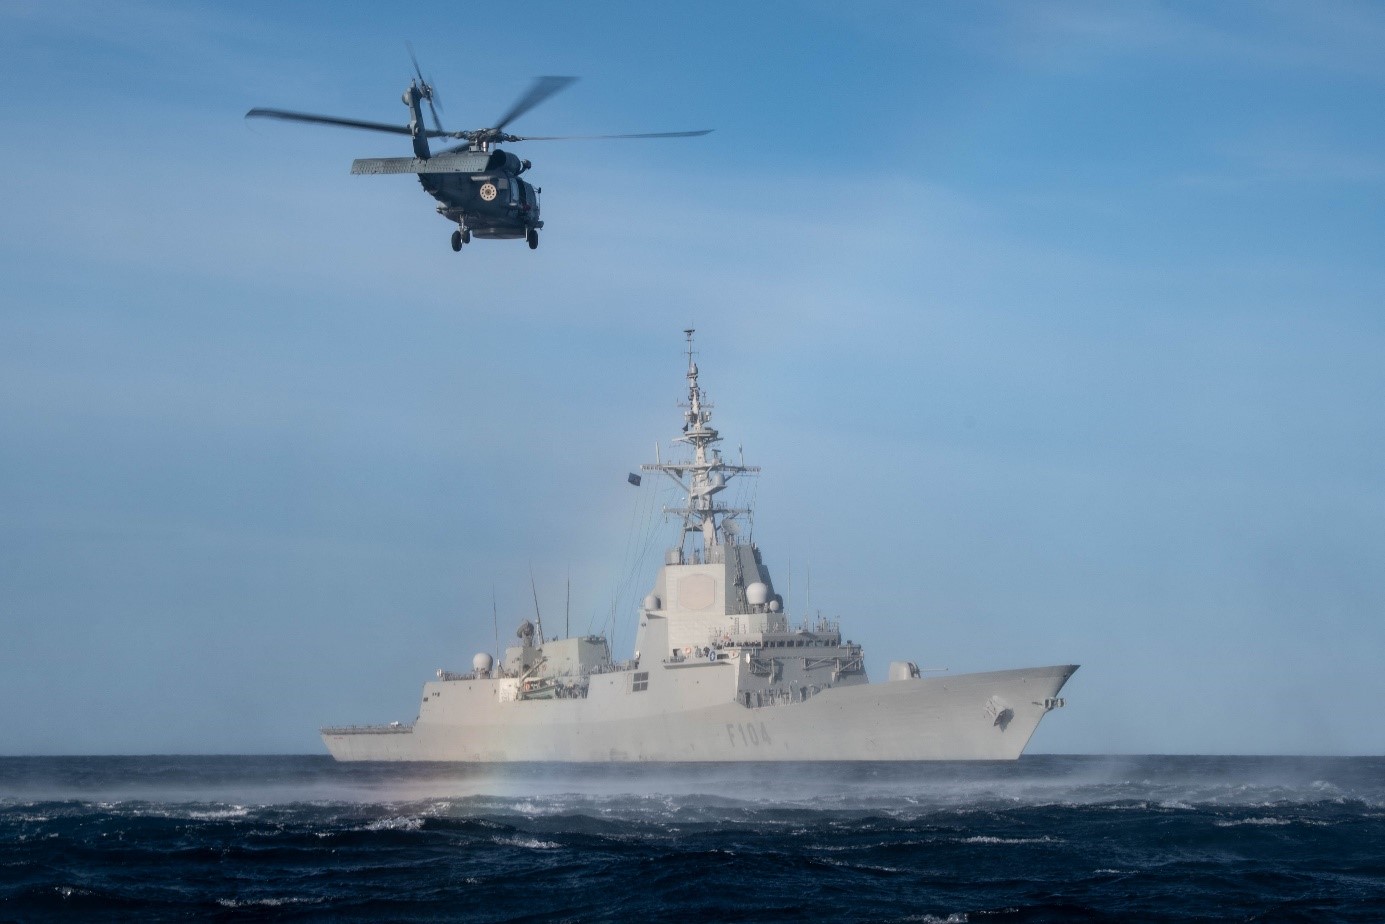 An helicopter flying next to the Spanish frigate